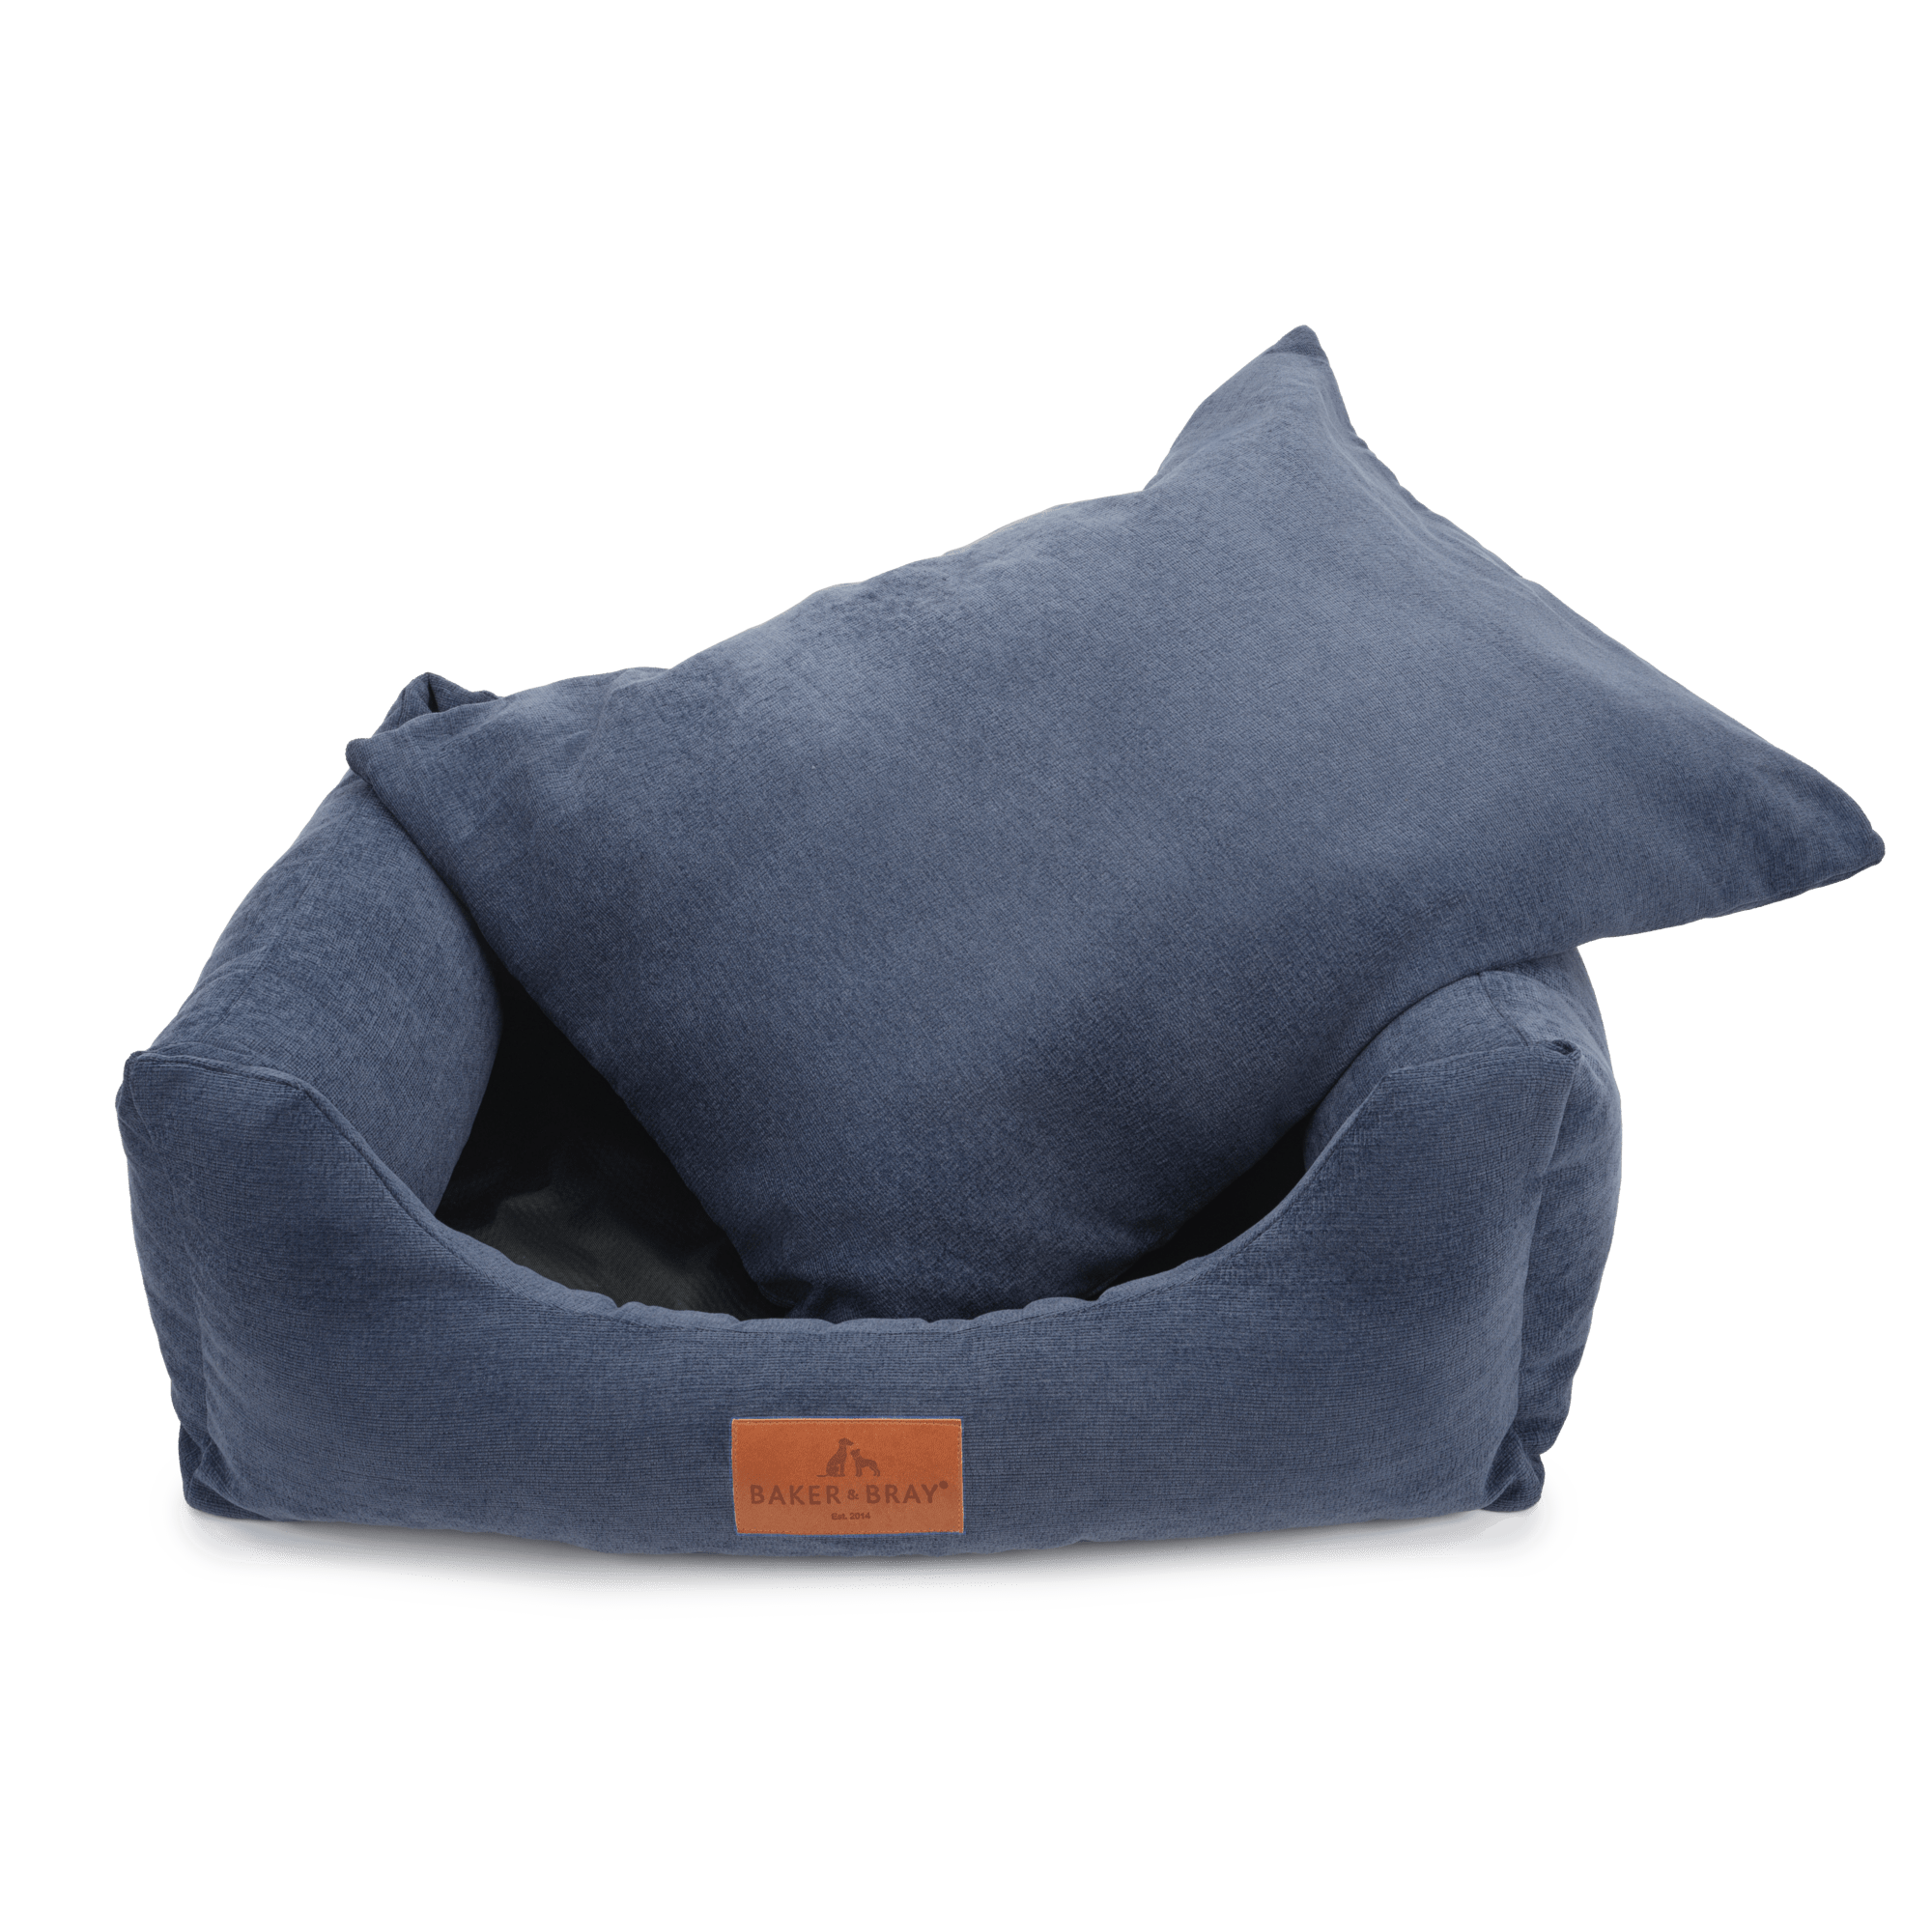 Eco Luxe Orthopaedic Luxury Dog Bed, Regal Blue